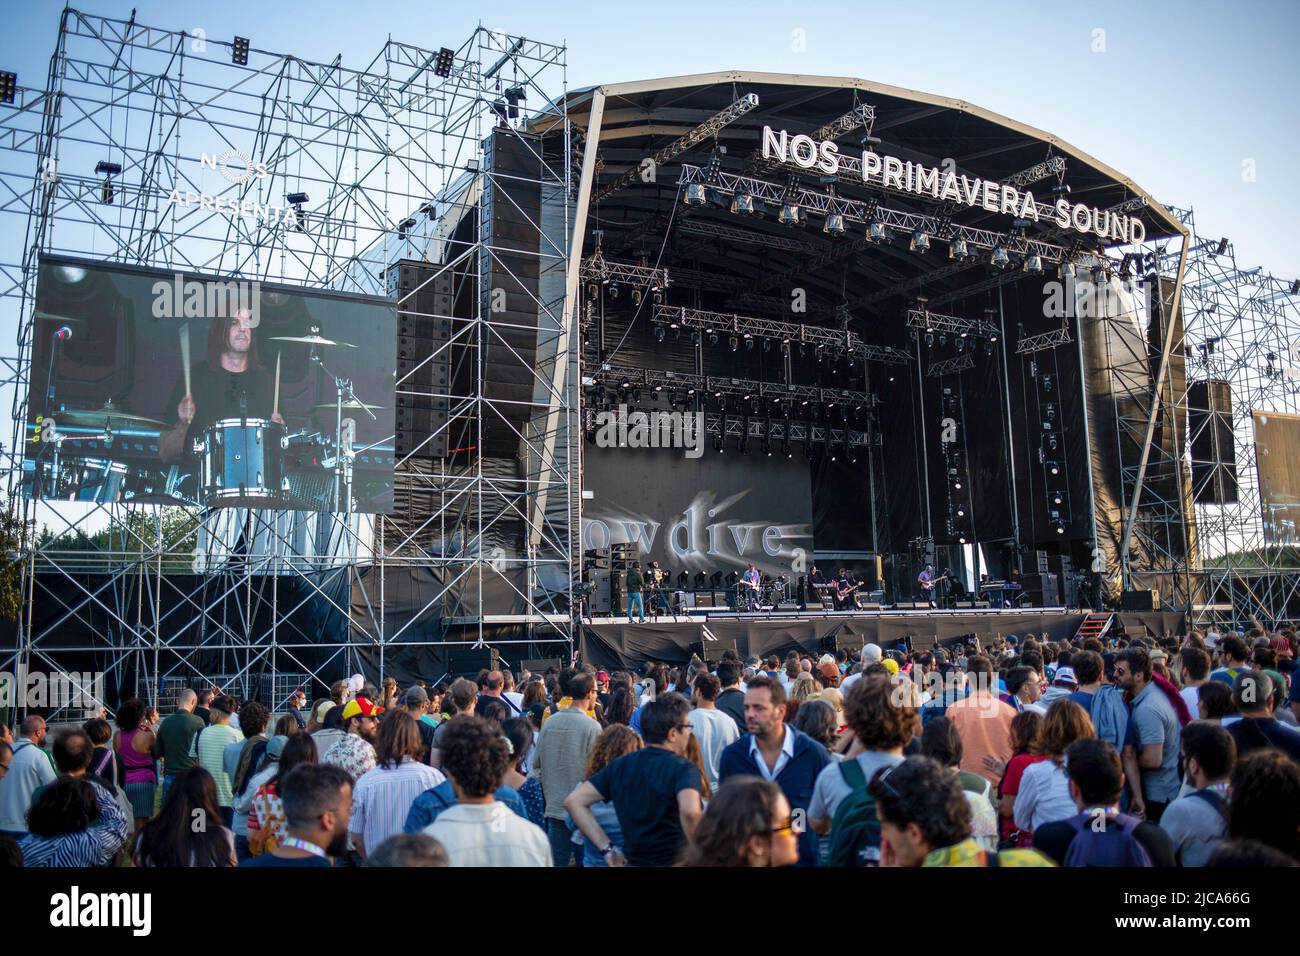 Porto, Portugal. 10th June, 2022. Festival goers at the NOS stage during  the 2022 NOS Primavera